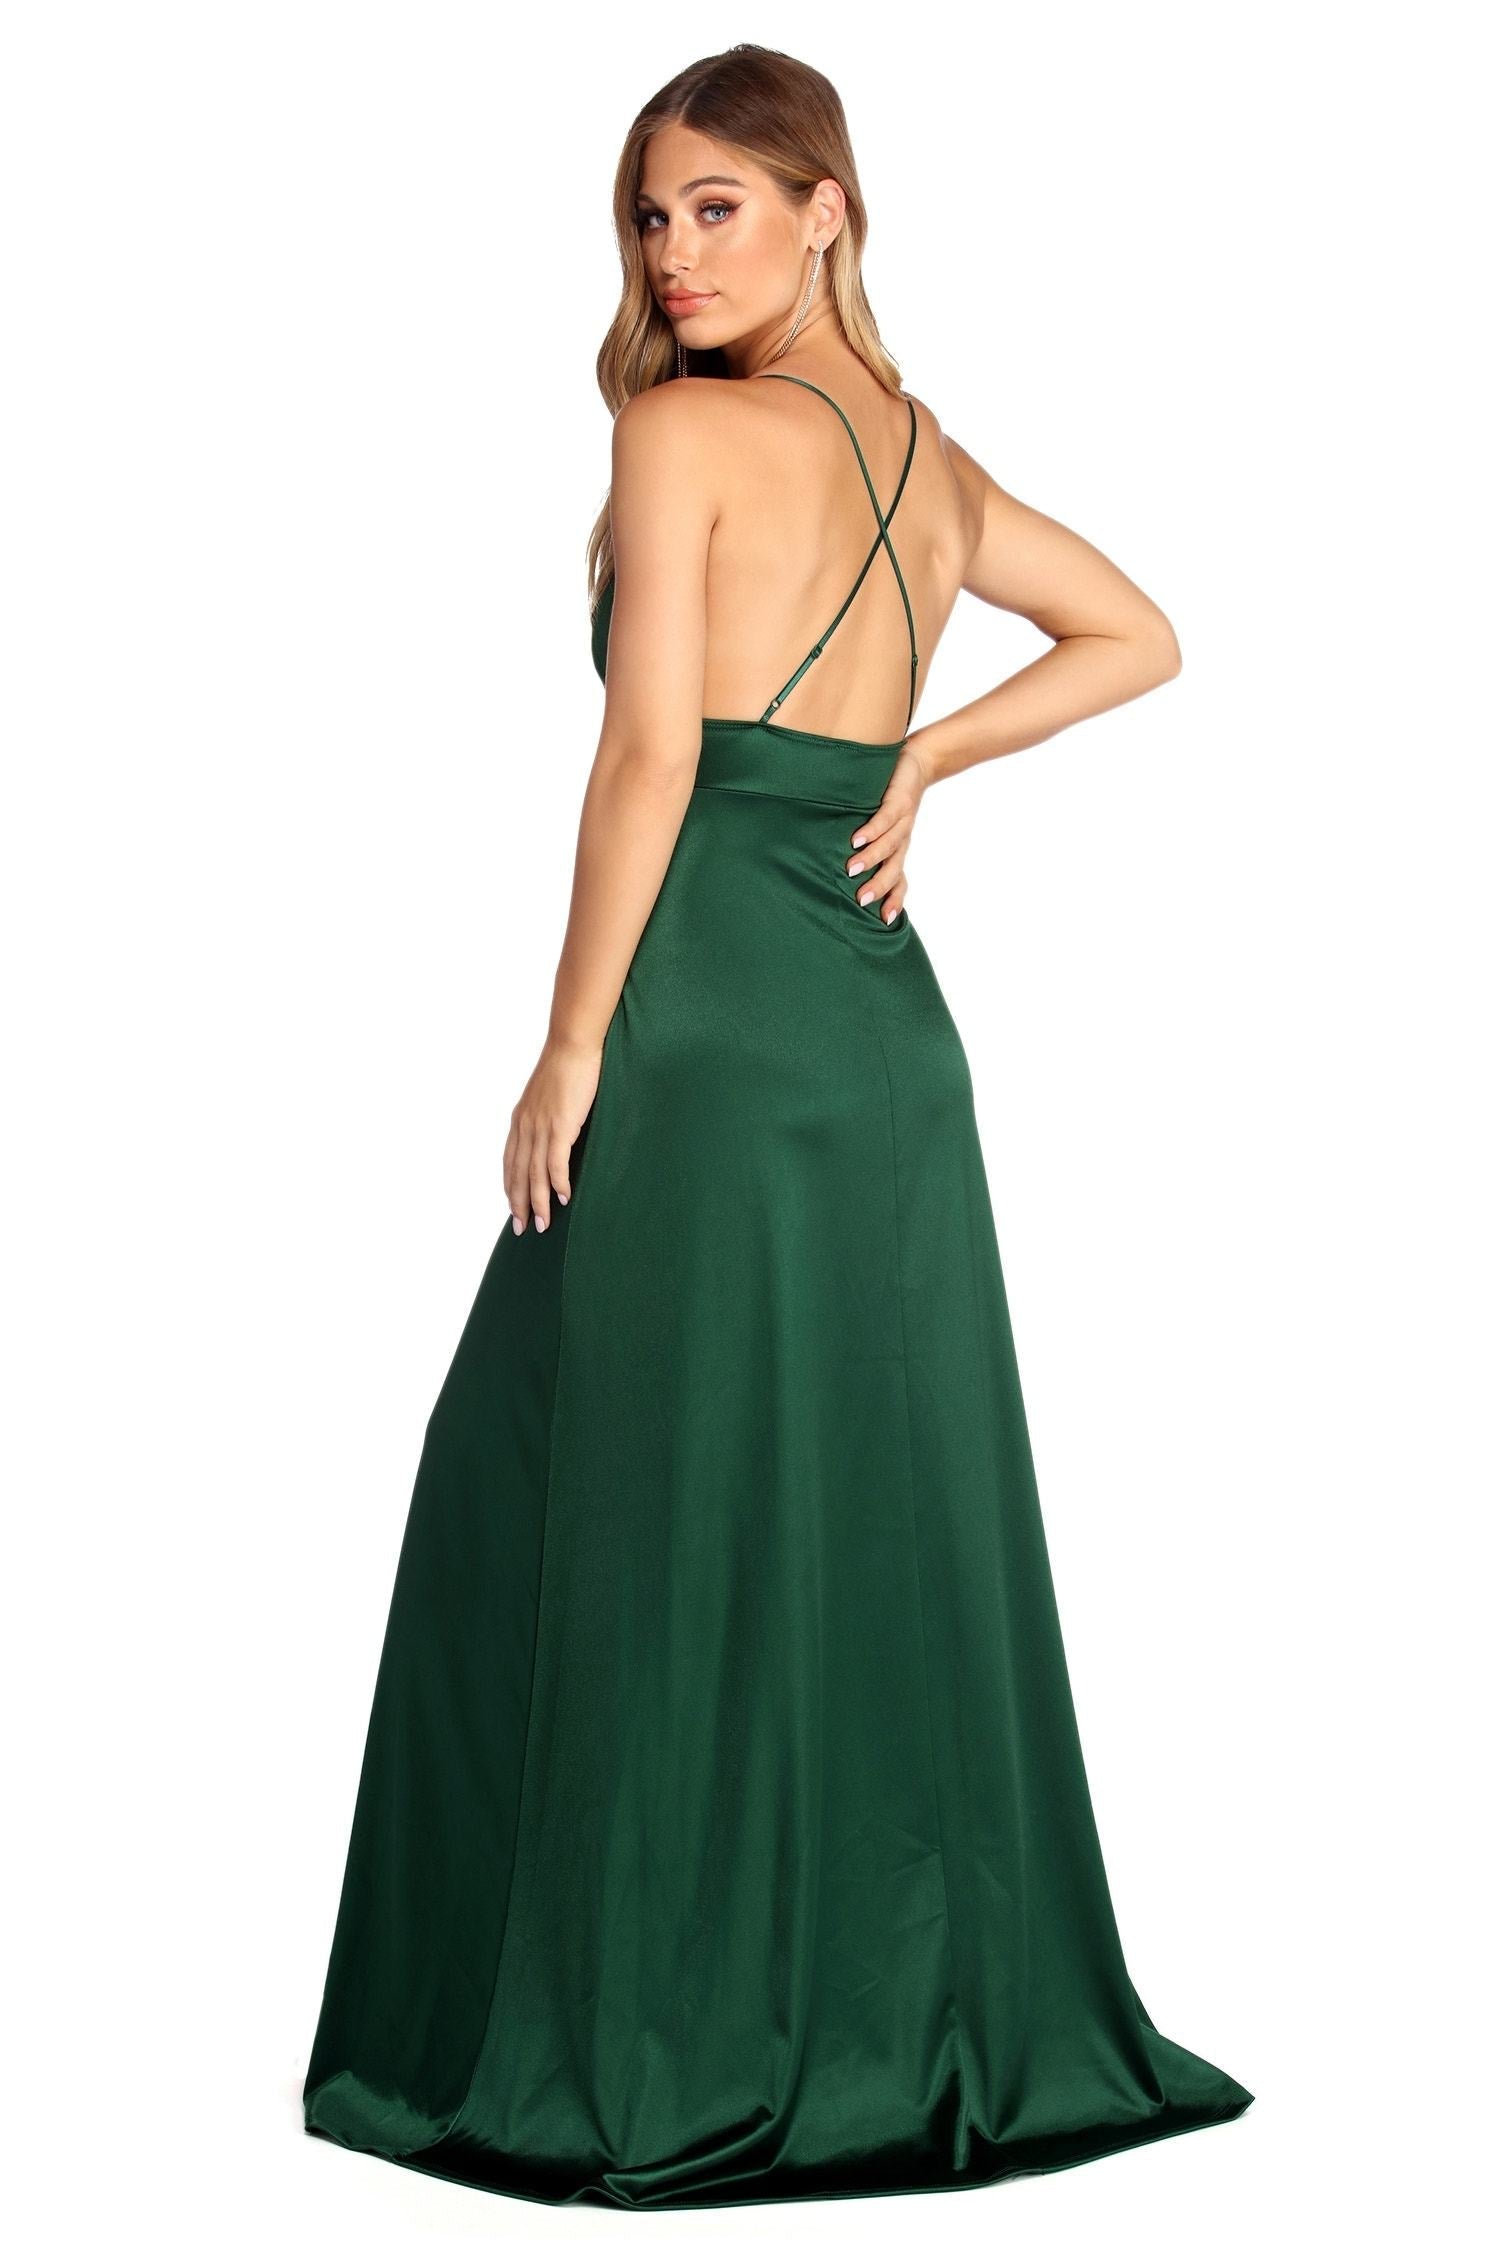 Evie Formal Sleeveless Satin Dress - Lady Occasions